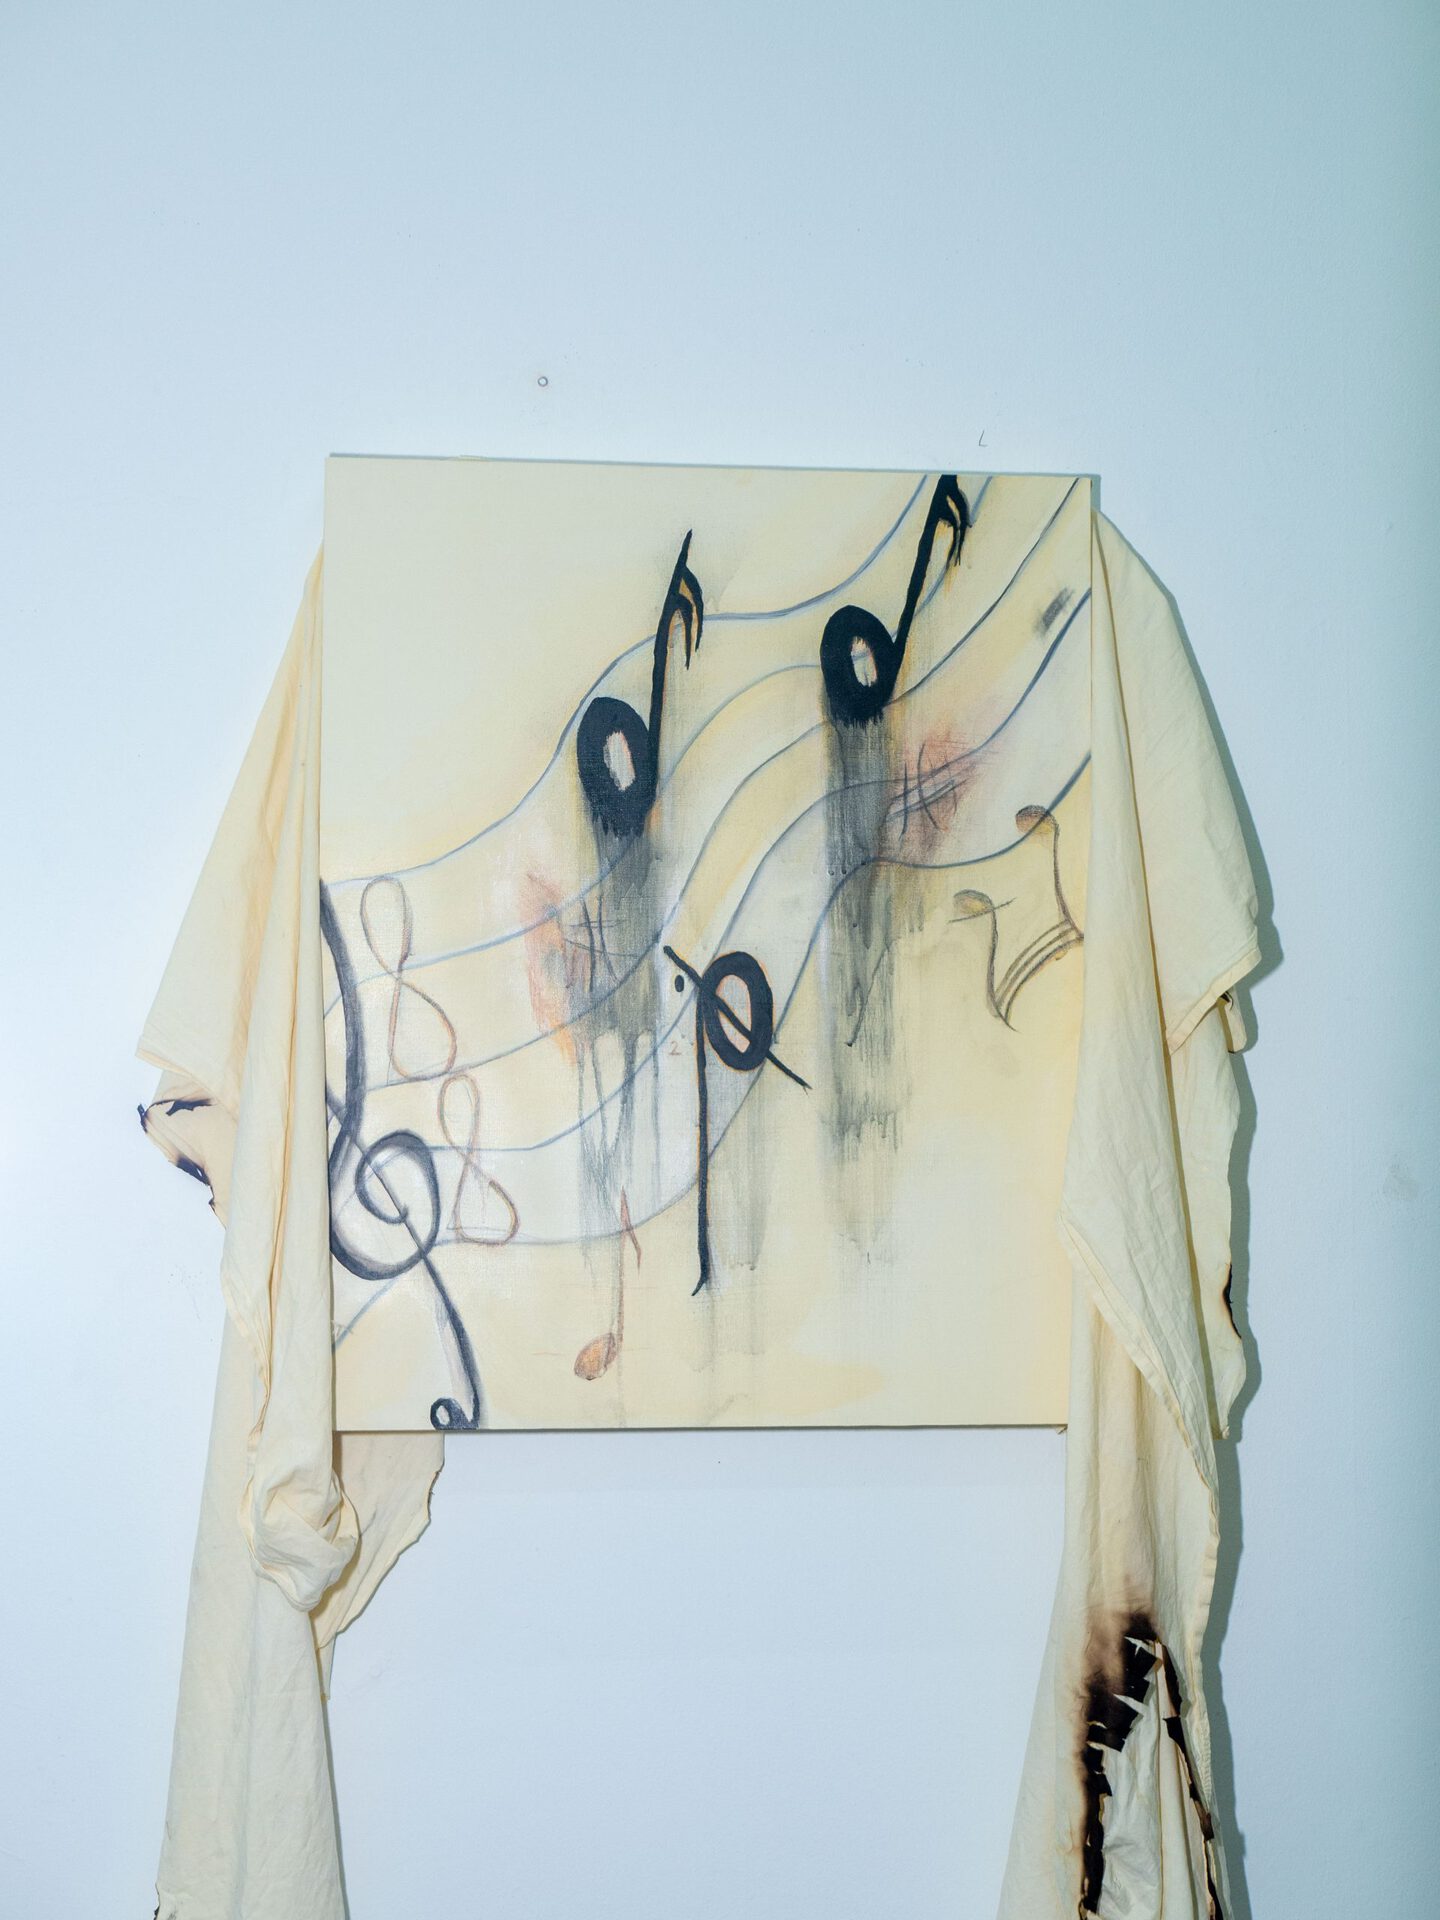 Hatice Pinarbasi - 2022 - Oil and Make up on Burned Bed Sheets - 70x100cm  (1)